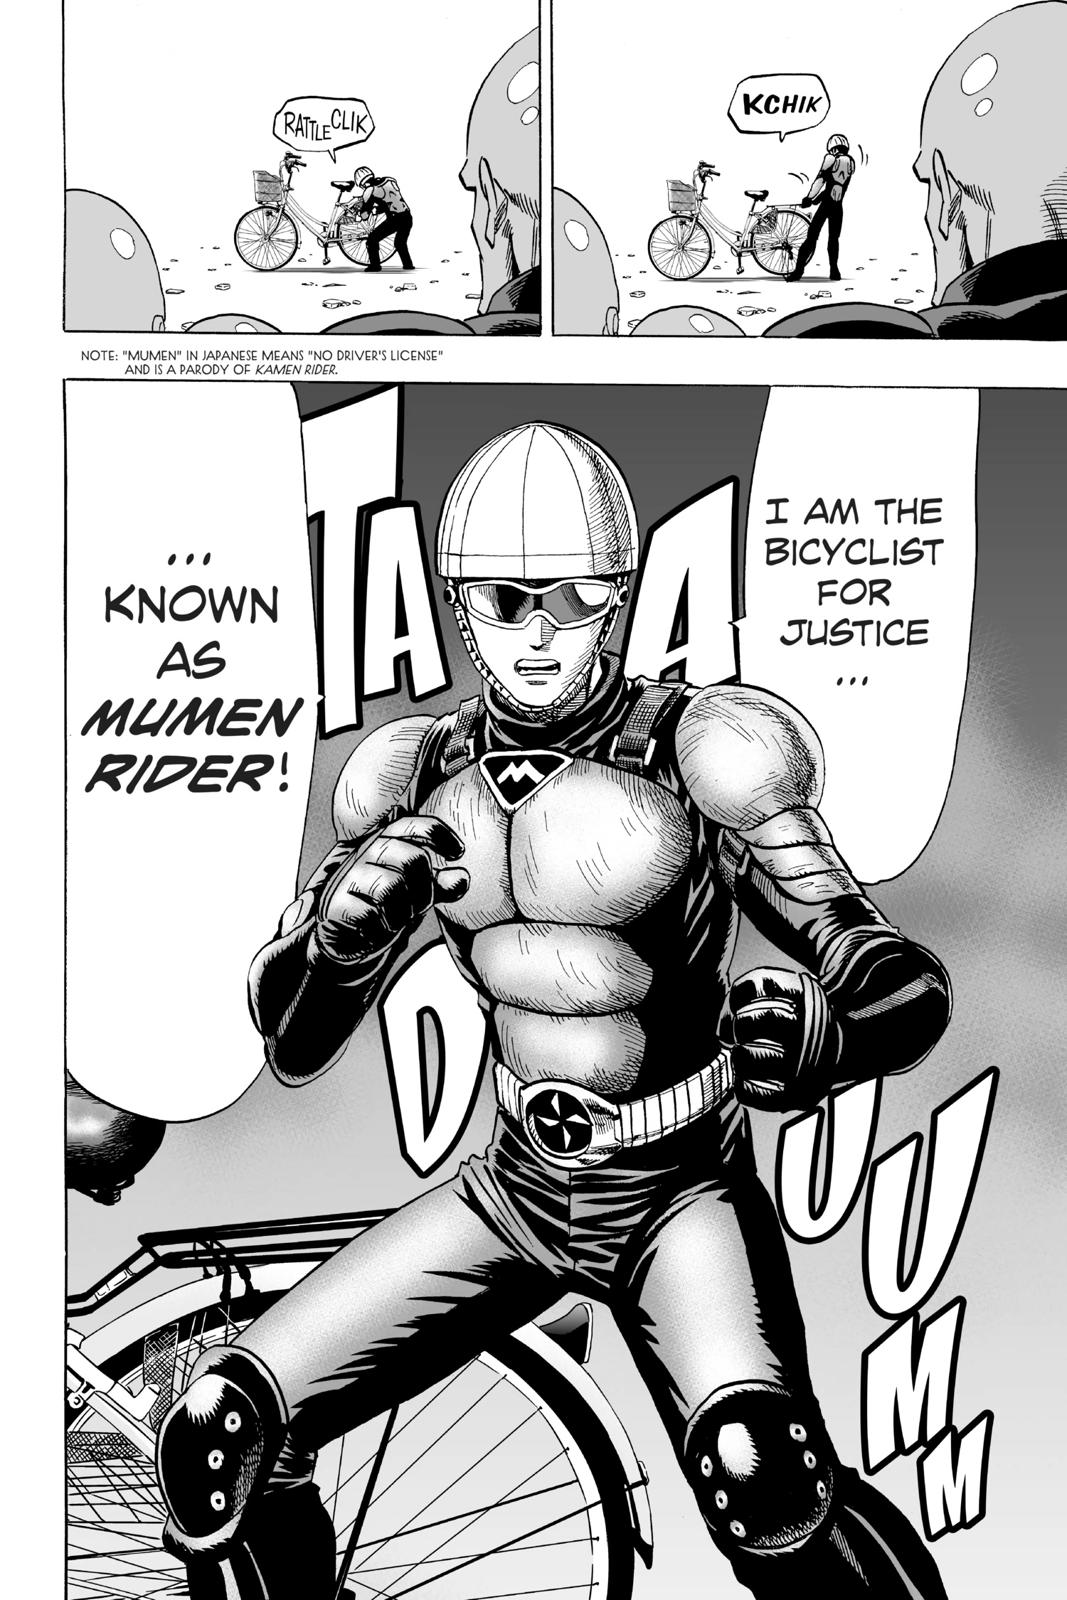 One-Punch Man, Punch 12 image 08